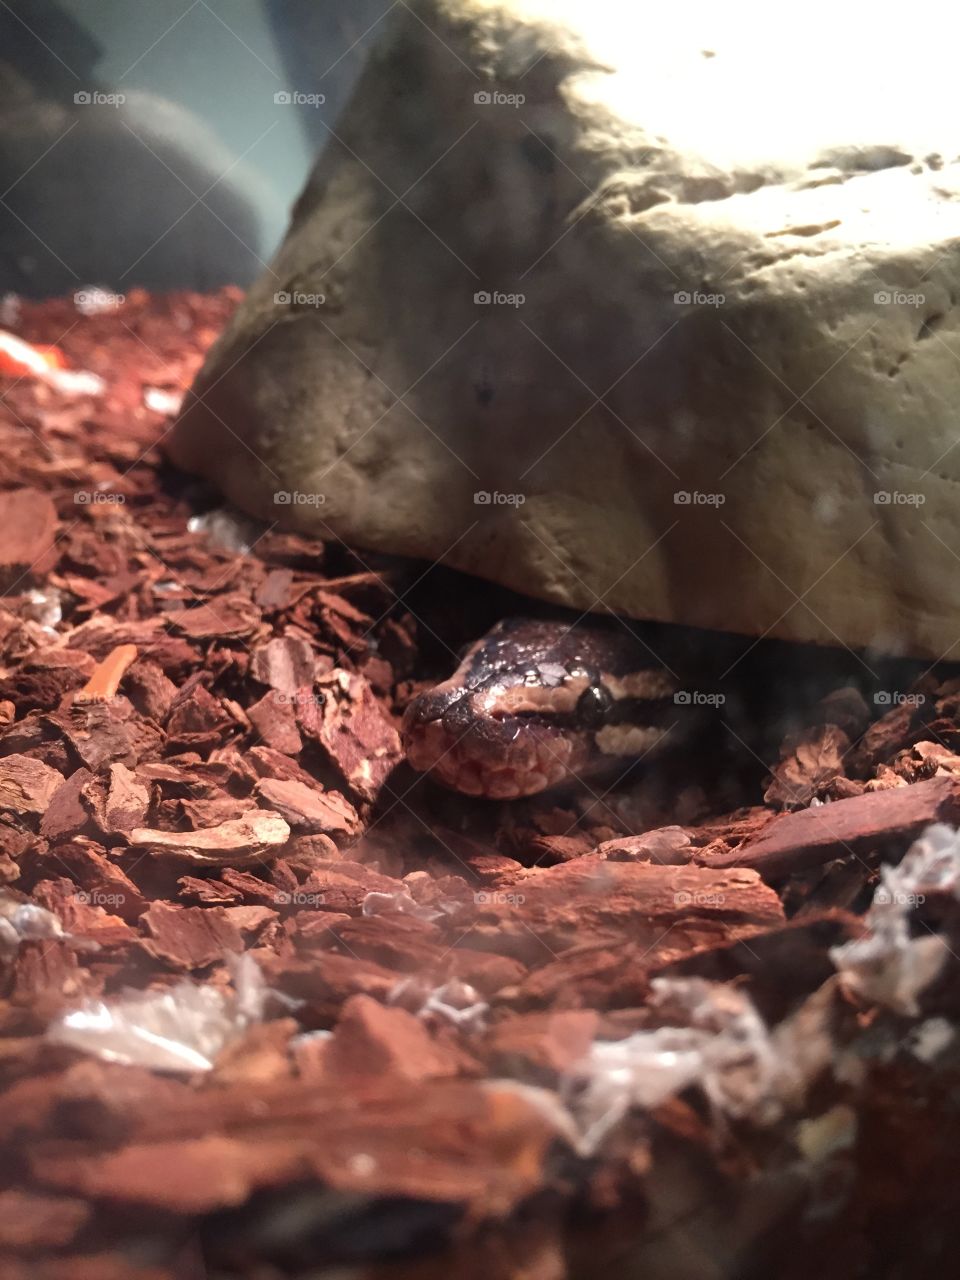 Ball python poking his head out 